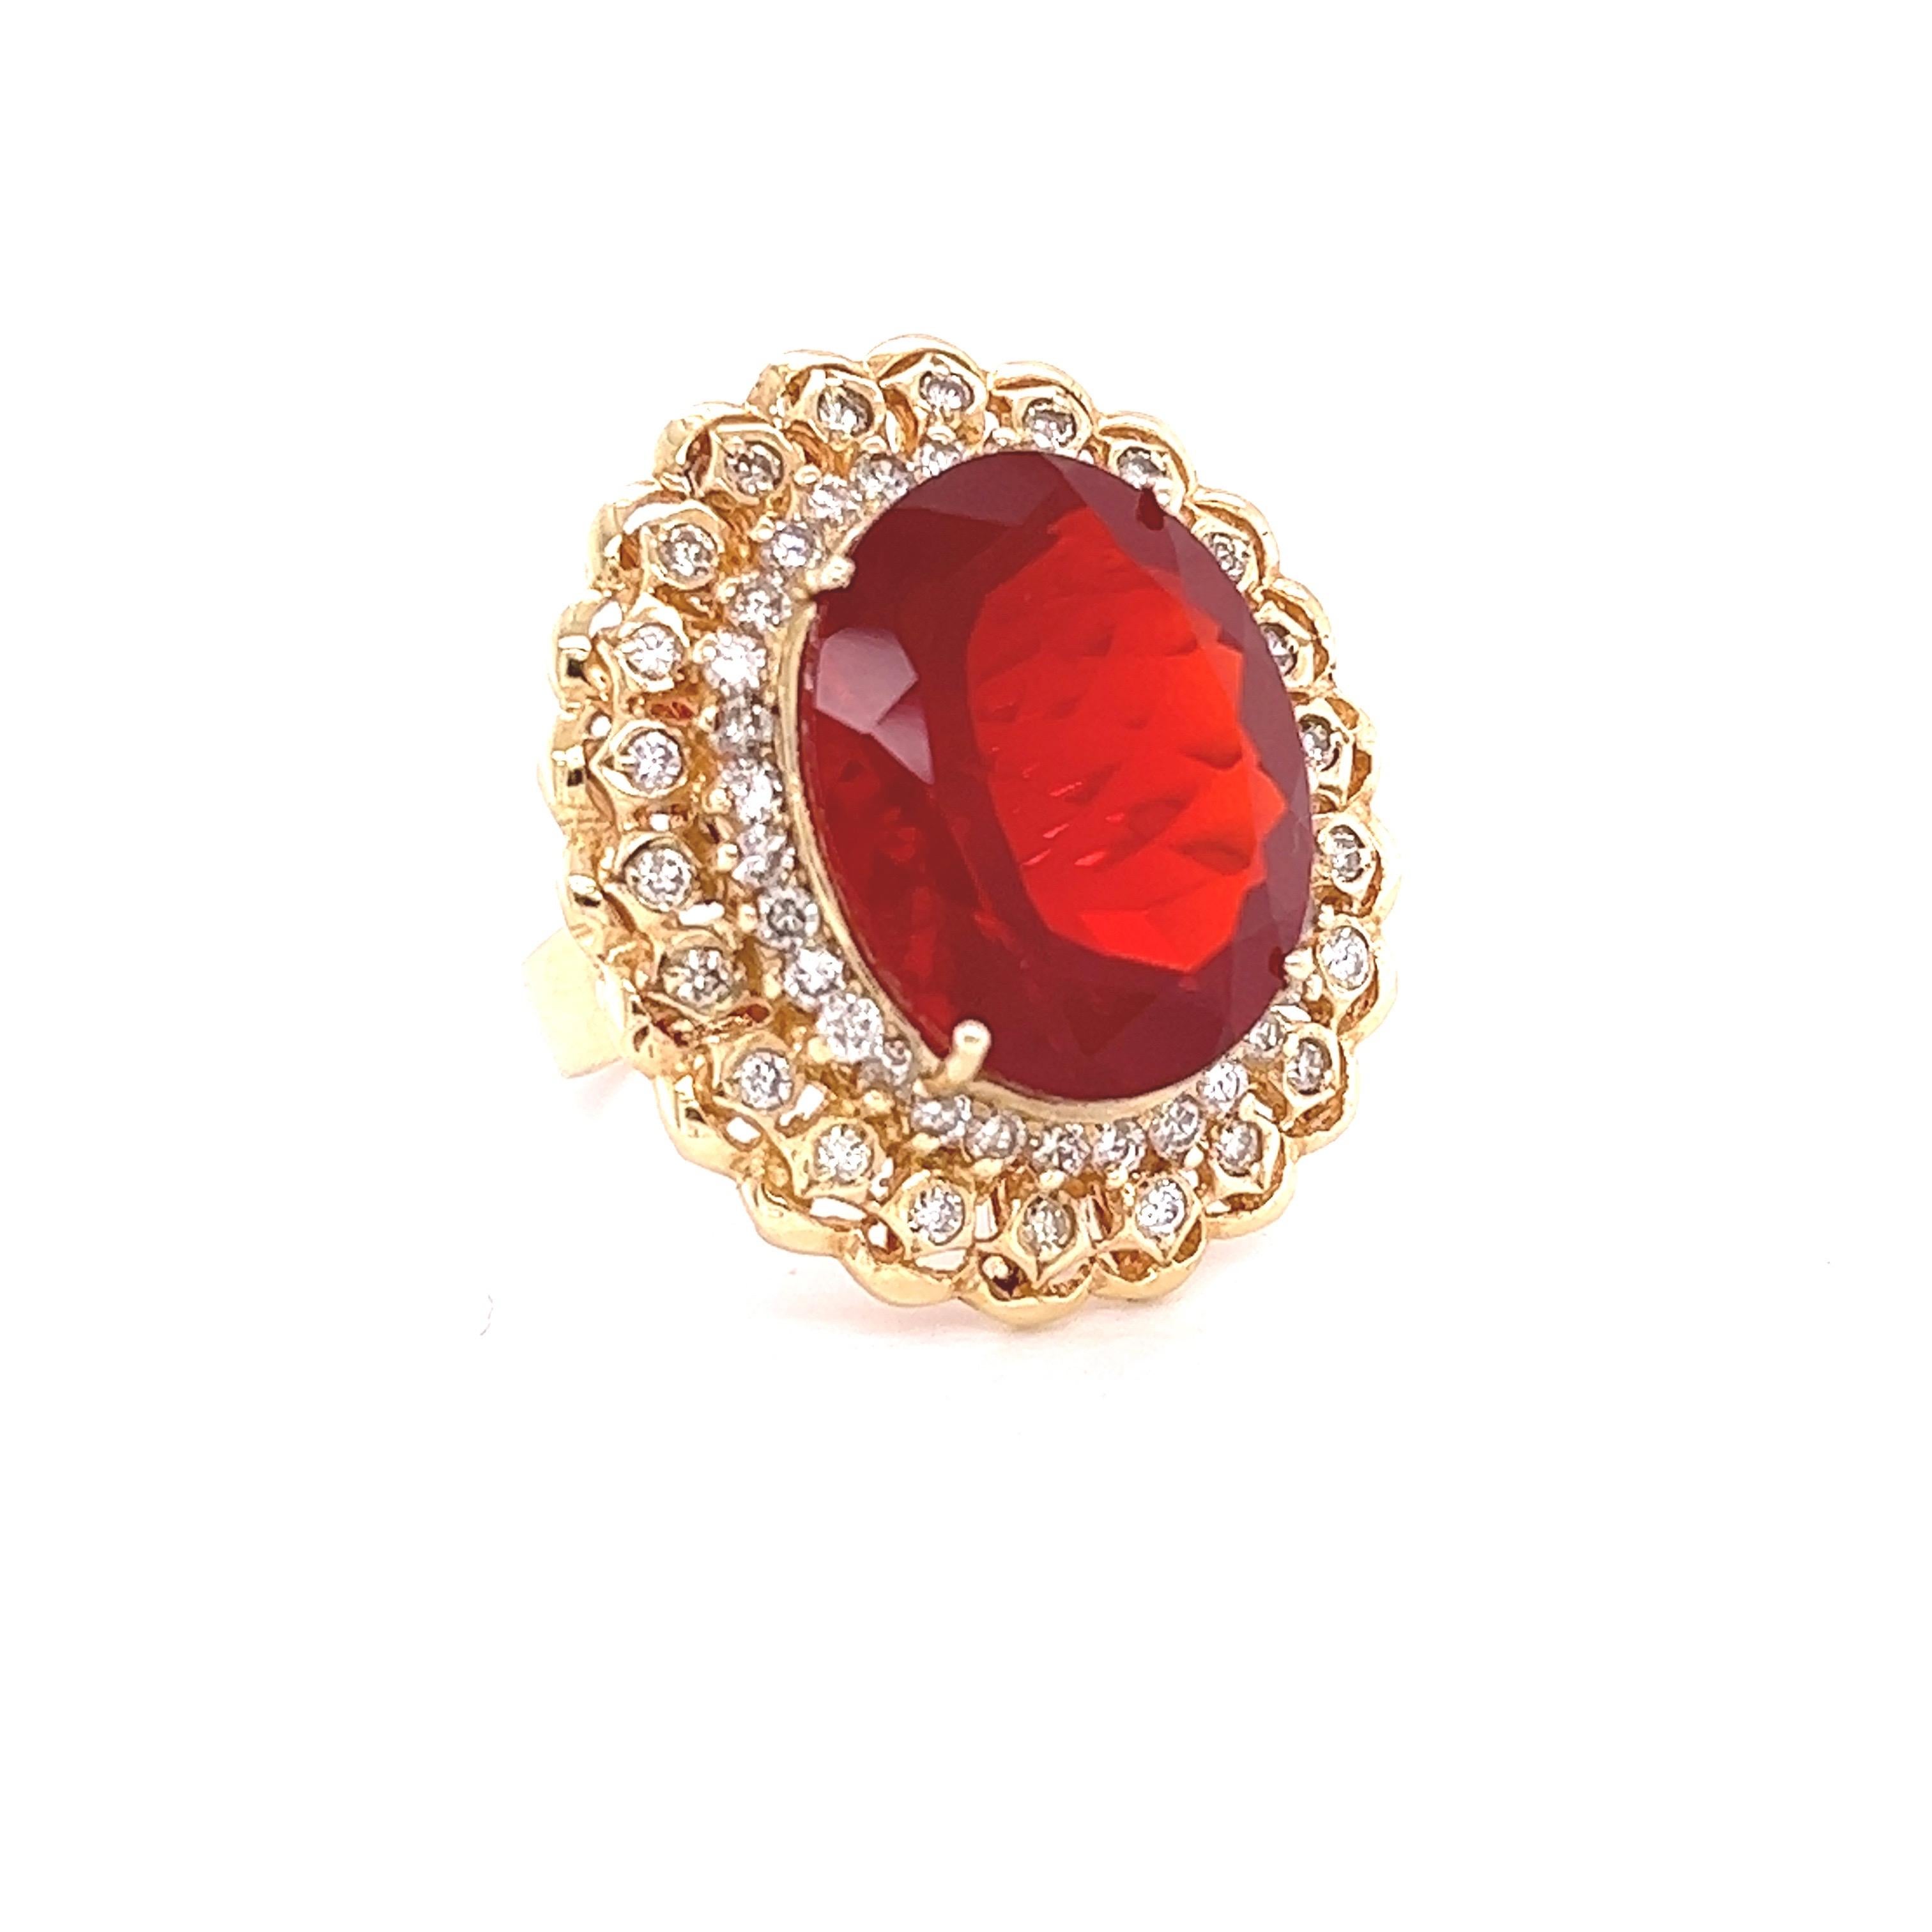 The Red Oval Cut Fire Opal weighs 10.01 Carats and has 53 Round Cut Diamonds that weigh 1.03 Carats. The clarity and color of the diamonds are VS-H. The total carat weight of the ring is 11.04 Carats. The Fire Opal has its origins from Mexico and